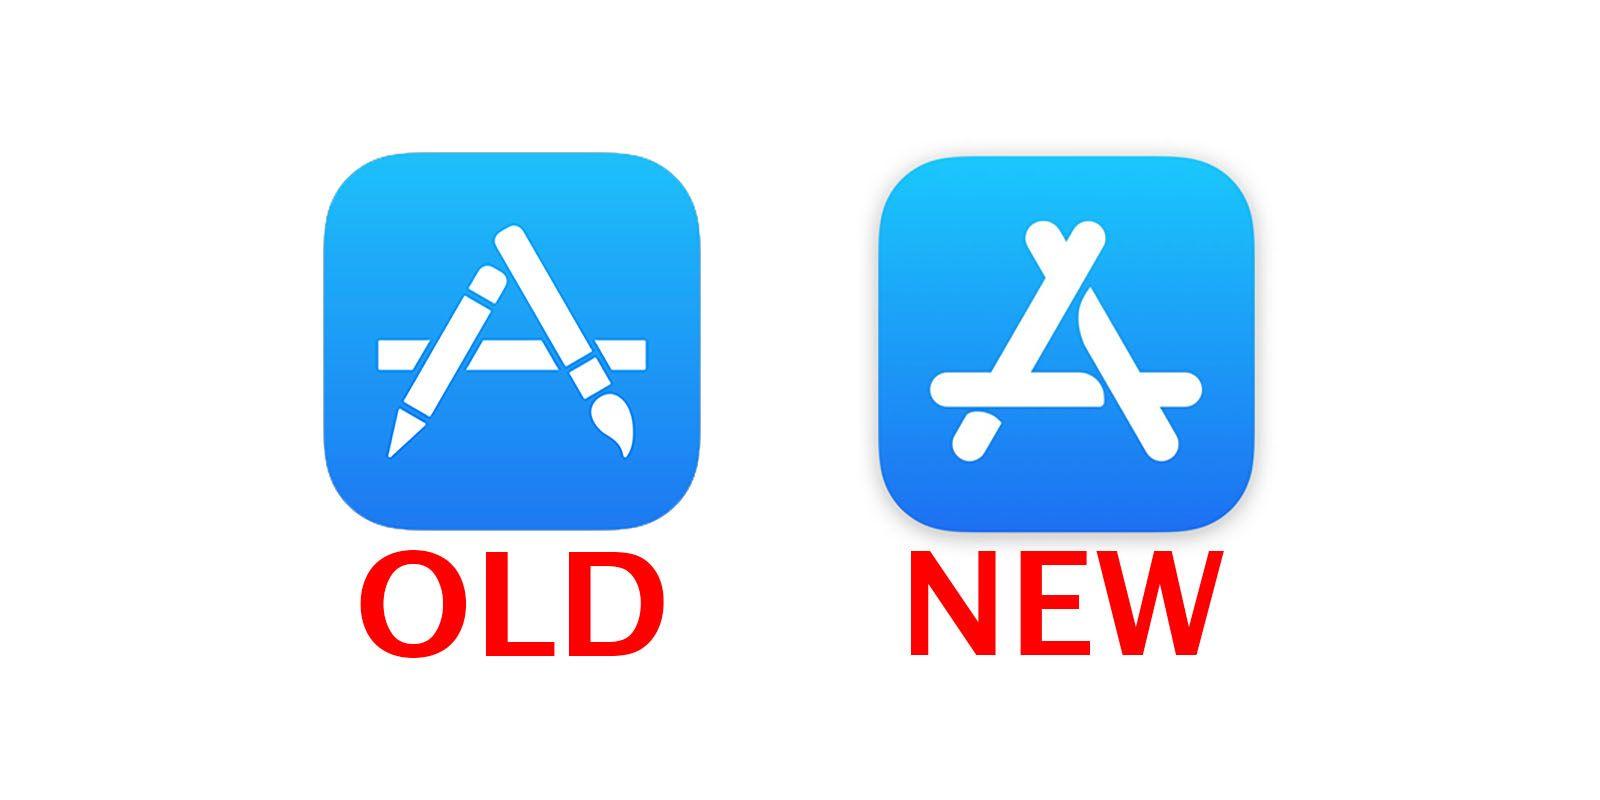 New App Store Logo - Apple just changed the App Store icon for the first time in years